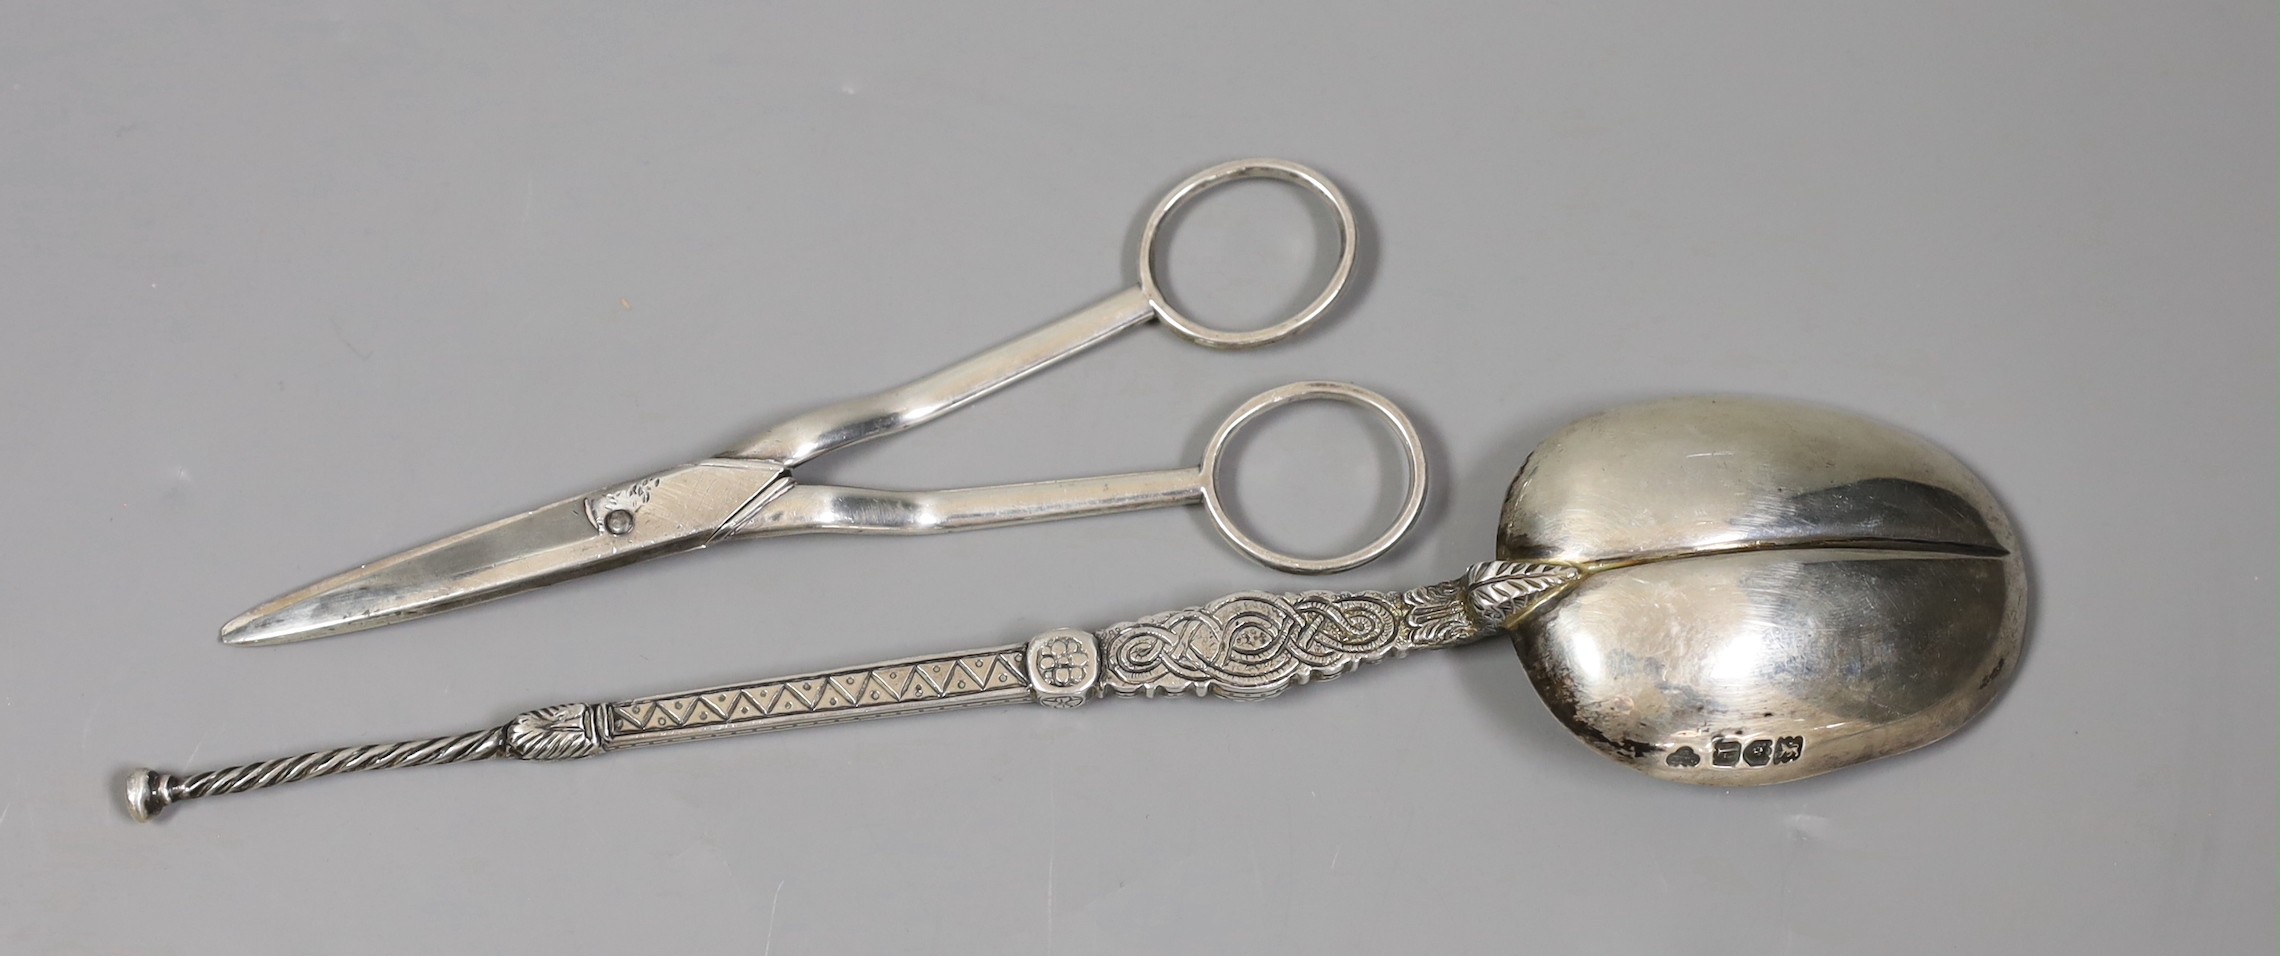 Pair of George III silver grape scissors, by Eley & Fearn, London, 1818 and a George V silver replica of the anointing spoon, Goldsmiths & Silversmiths Co Ltd, London 1910, 166 grams.